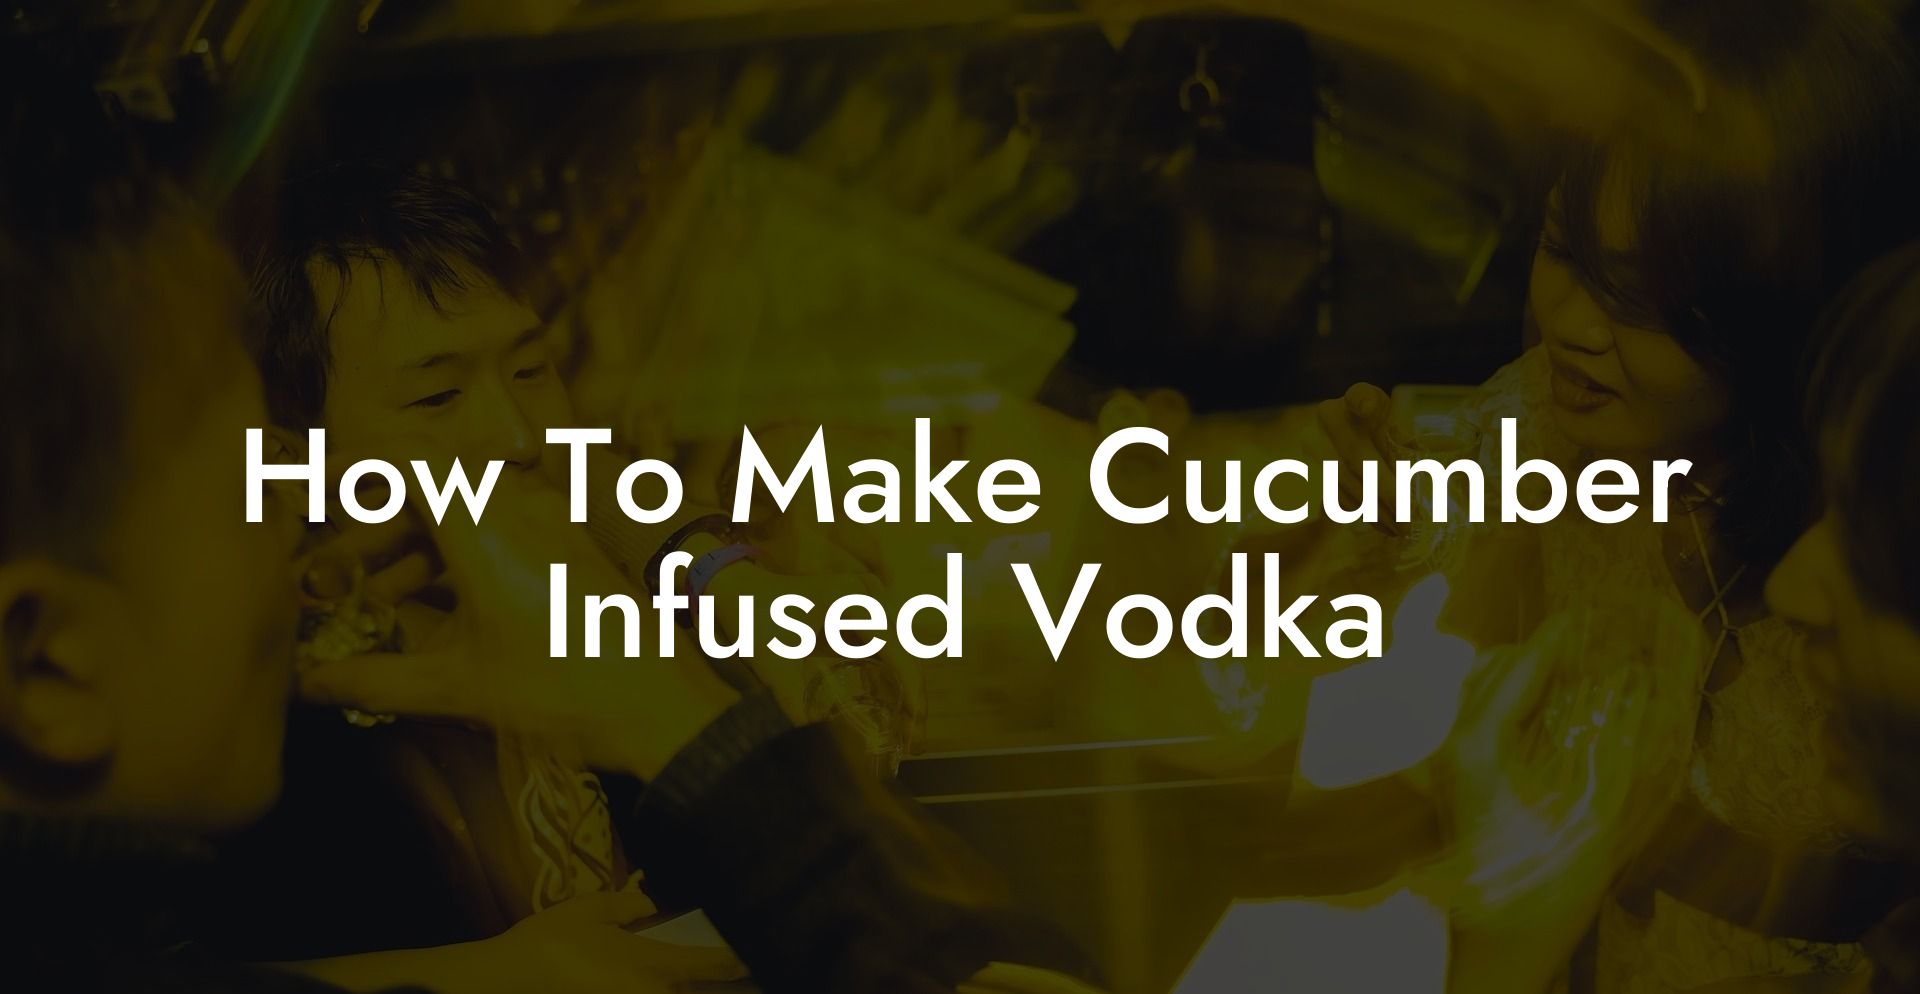 How To Make Cucumber Infused Vodka